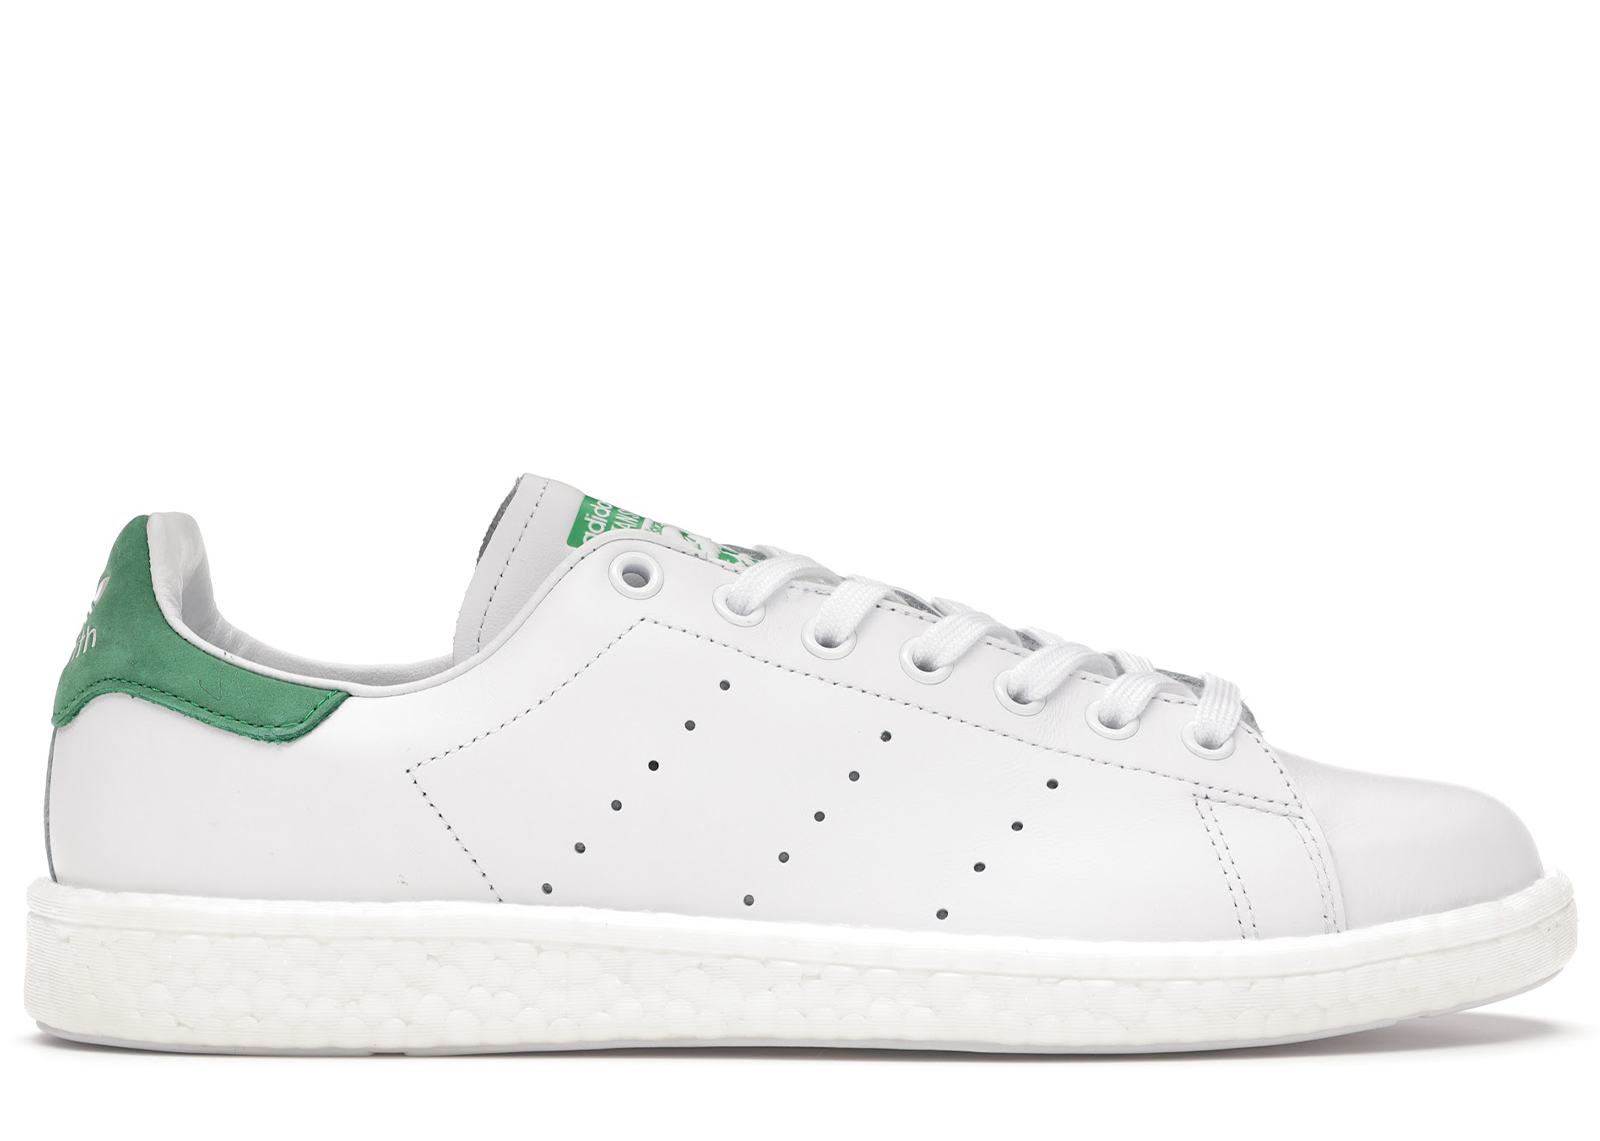 Buy Adidas Stan Smith for Men and Women